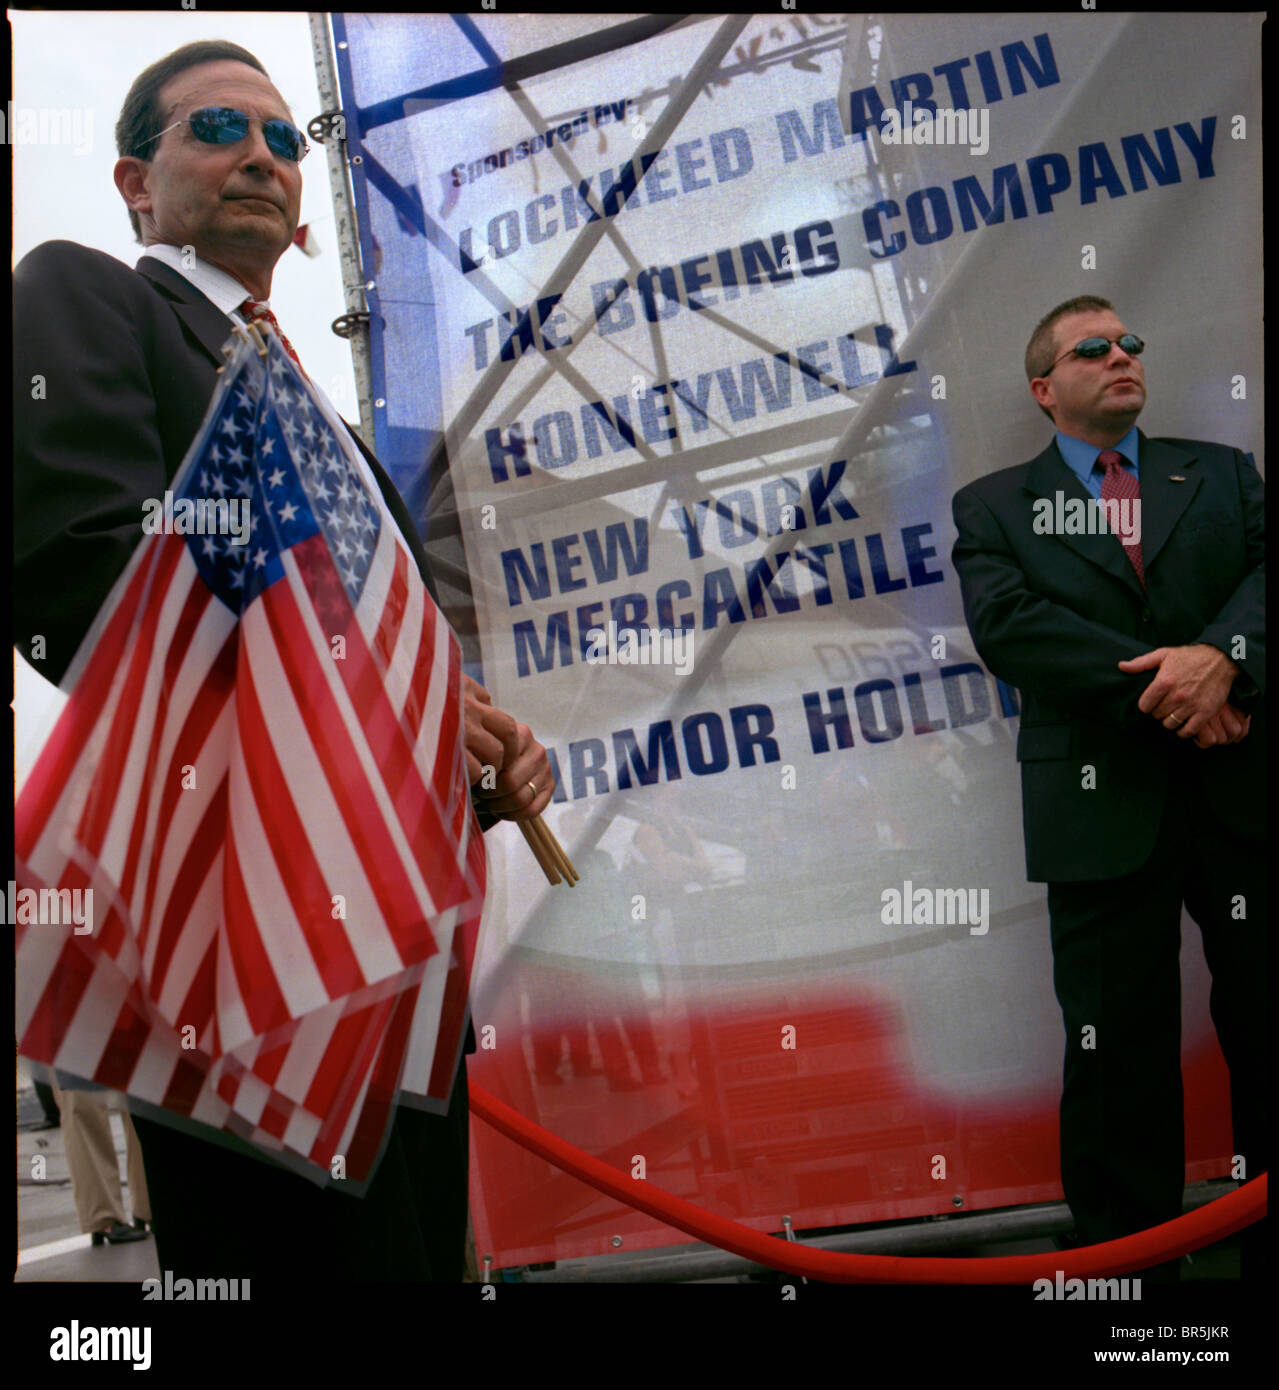 Republican National Convention 2004 in New York City Stock Photo